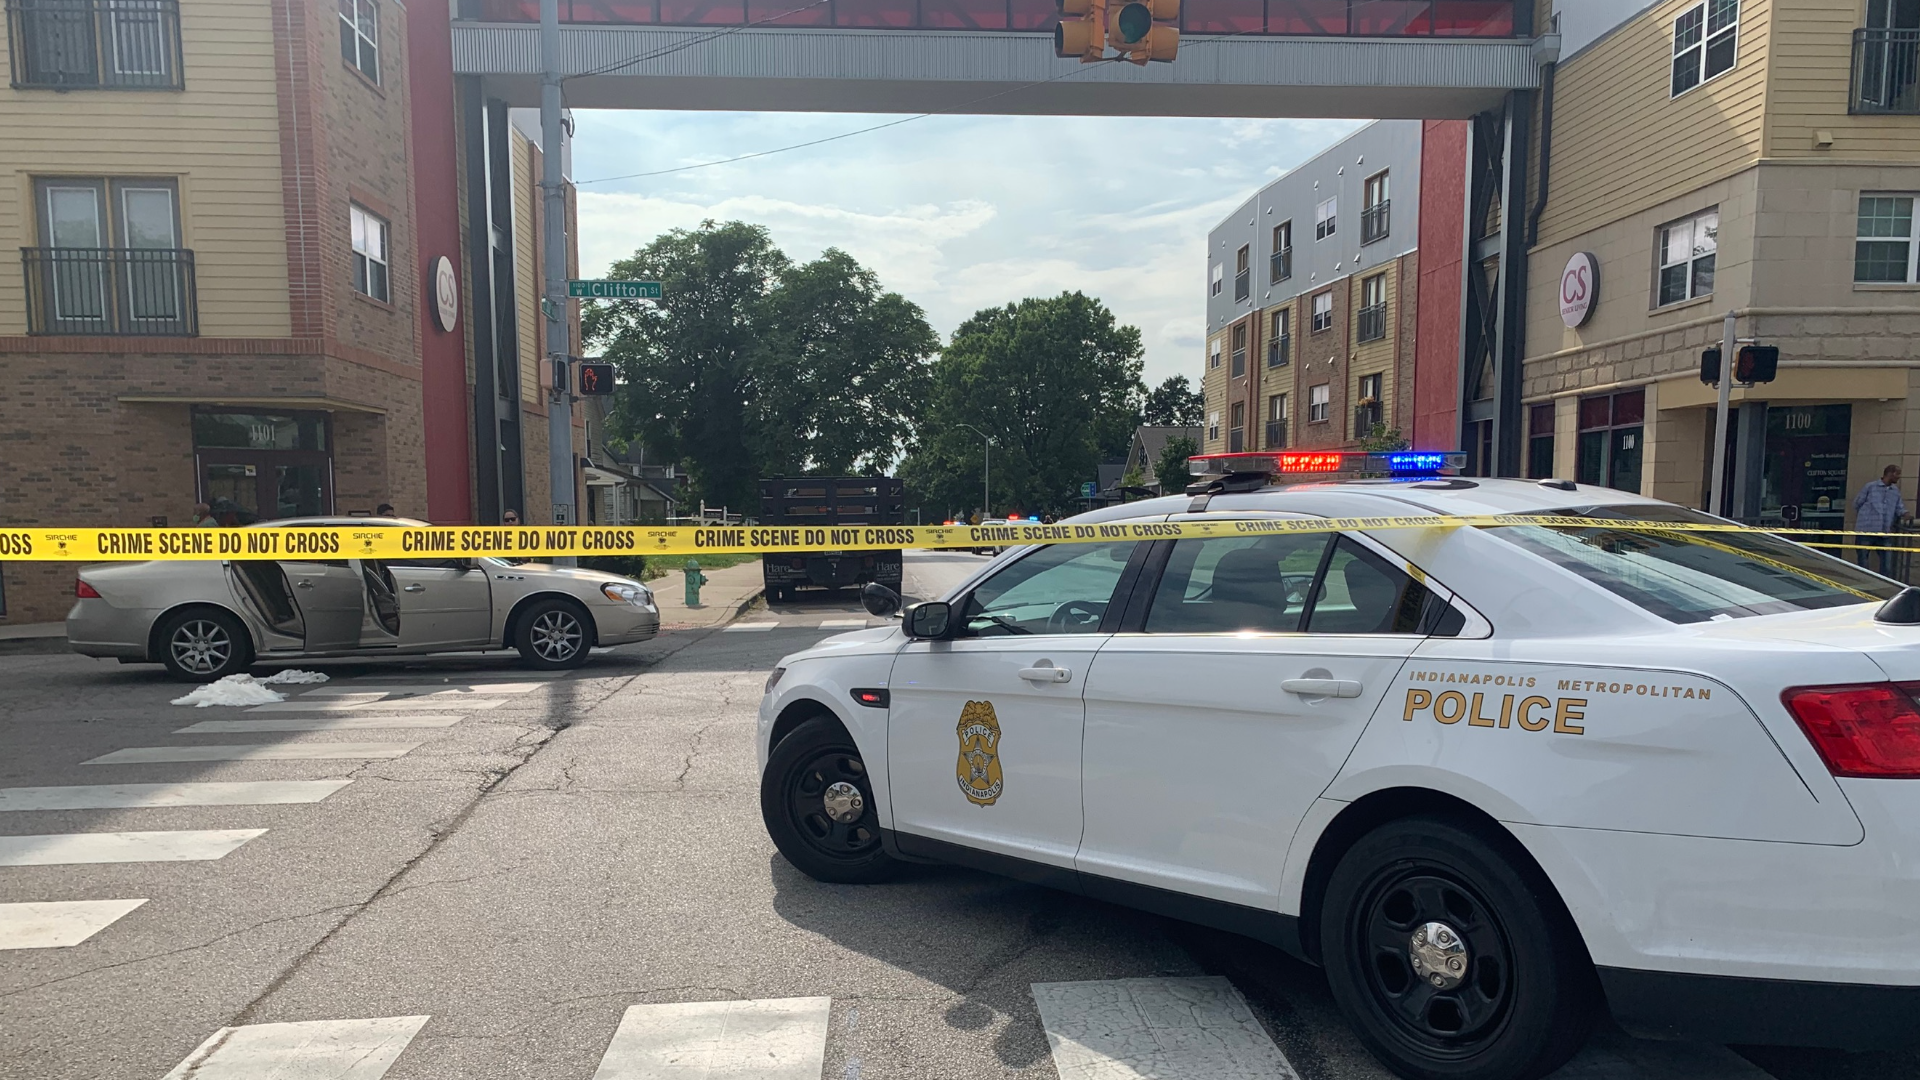 Police are investigating a shooting outside a funeral home that left a 4-year-old girl in critical condition and four other people injured on Saturday, July 31.